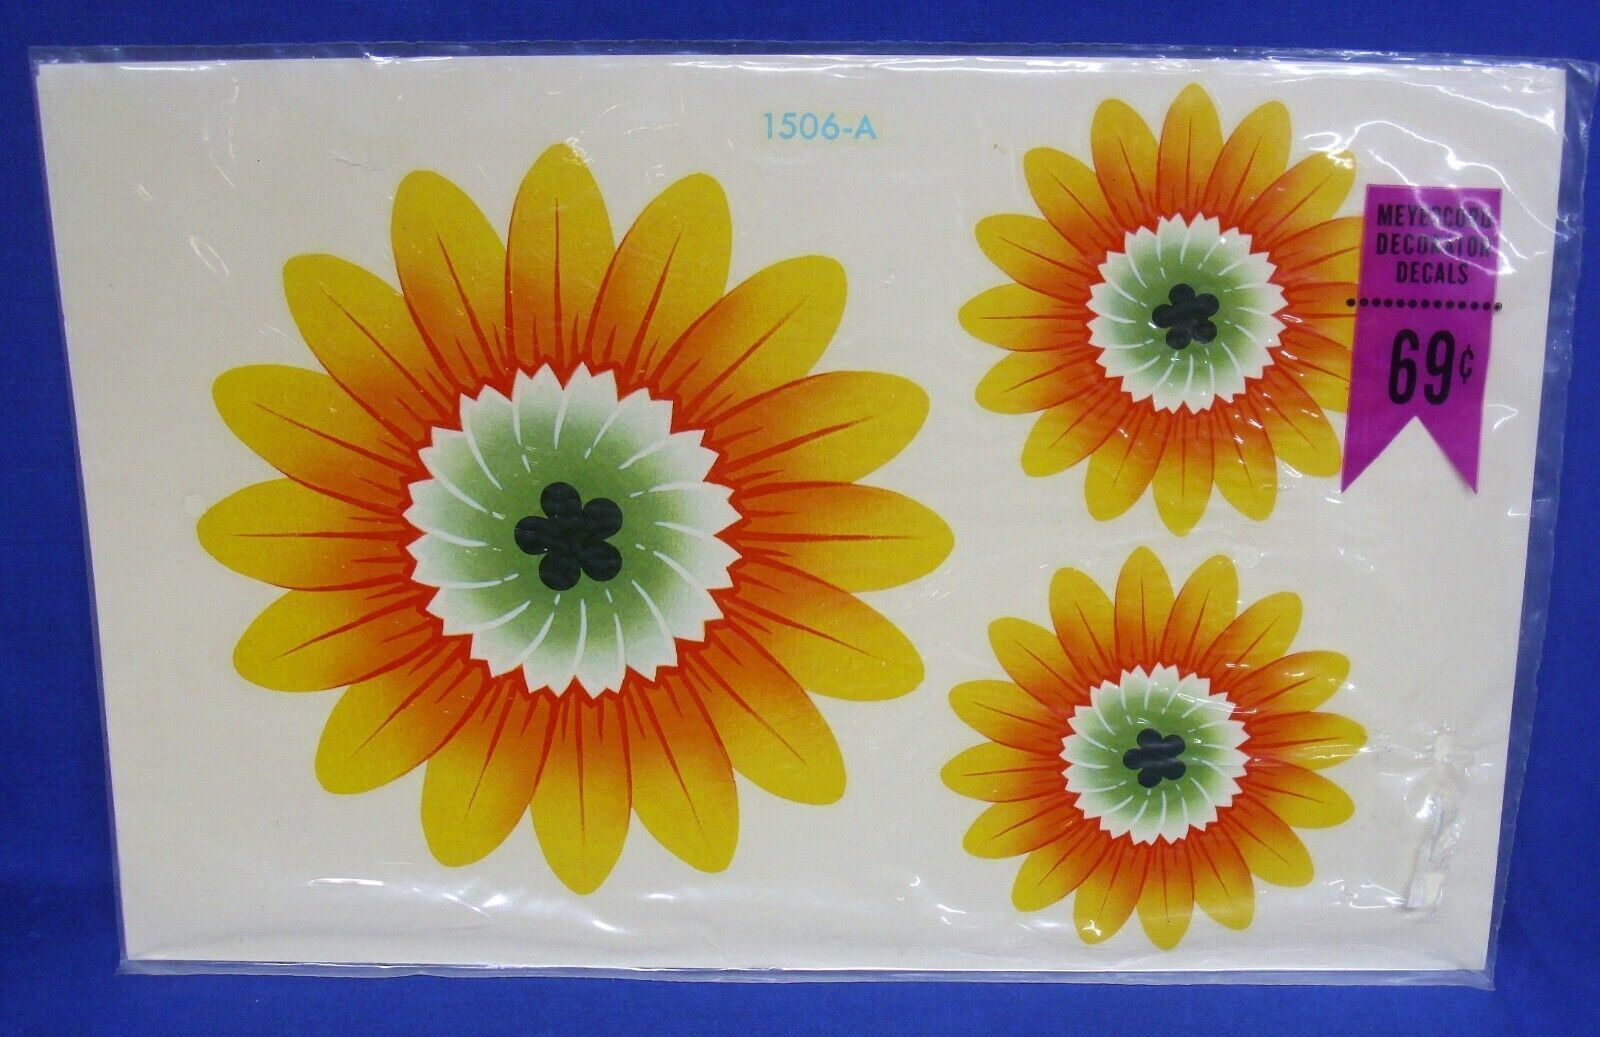 Vtg Meyercord Decals 1 Sheet 3 Sunflowers or Yellow Flower #1506-A Water Applied